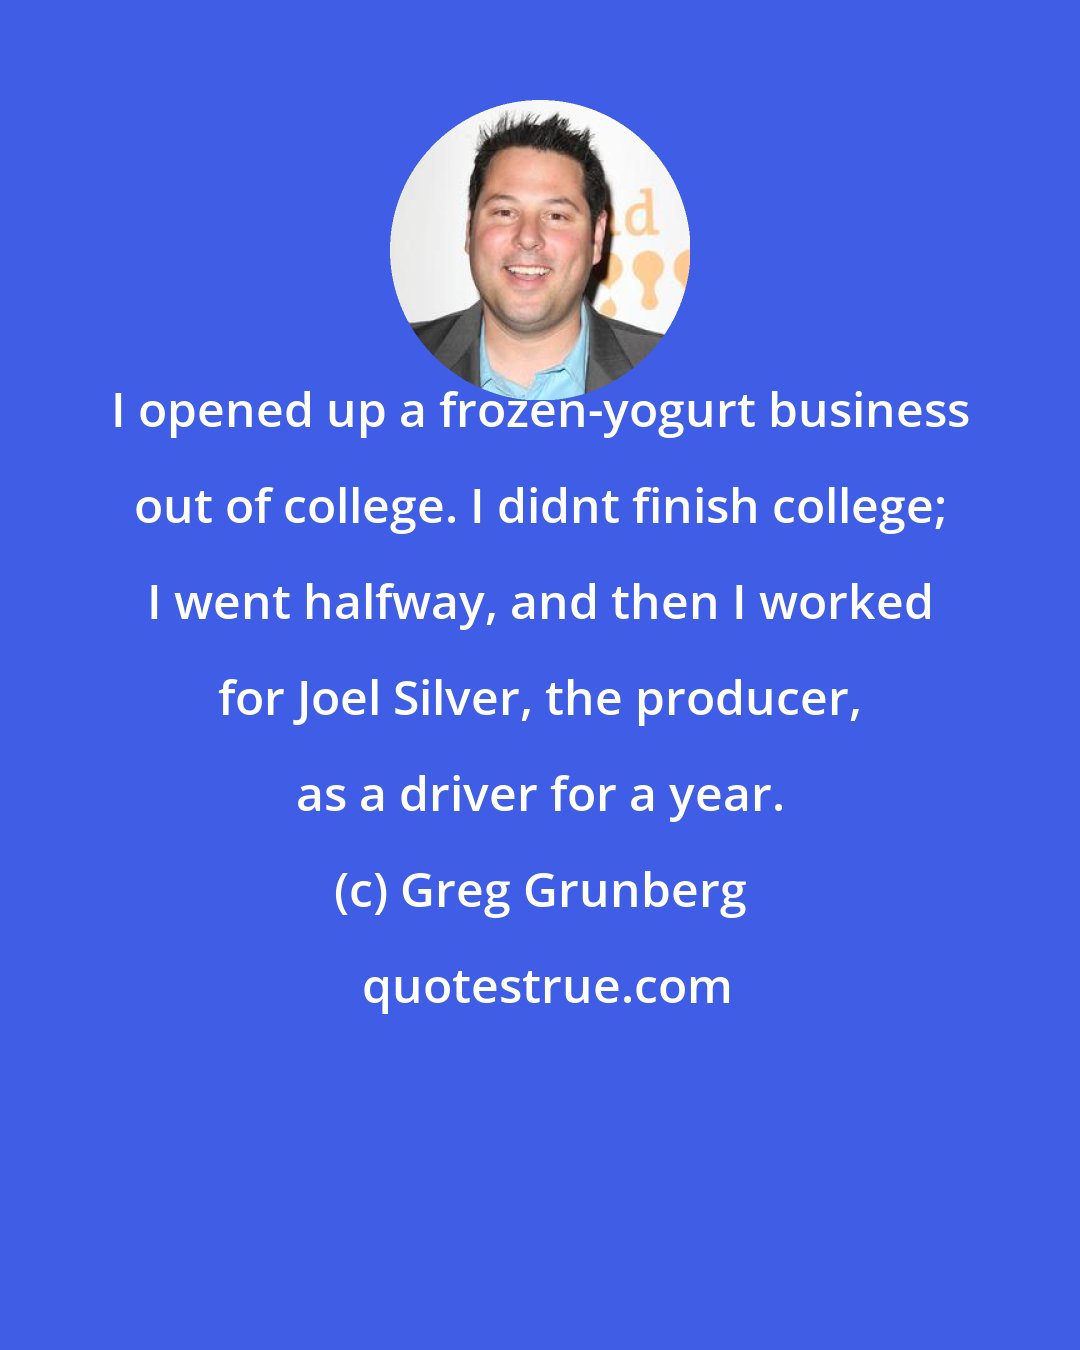 Greg Grunberg: I opened up a frozen-yogurt business out of college. I didnt finish college; I went halfway, and then I worked for Joel Silver, the producer, as a driver for a year.